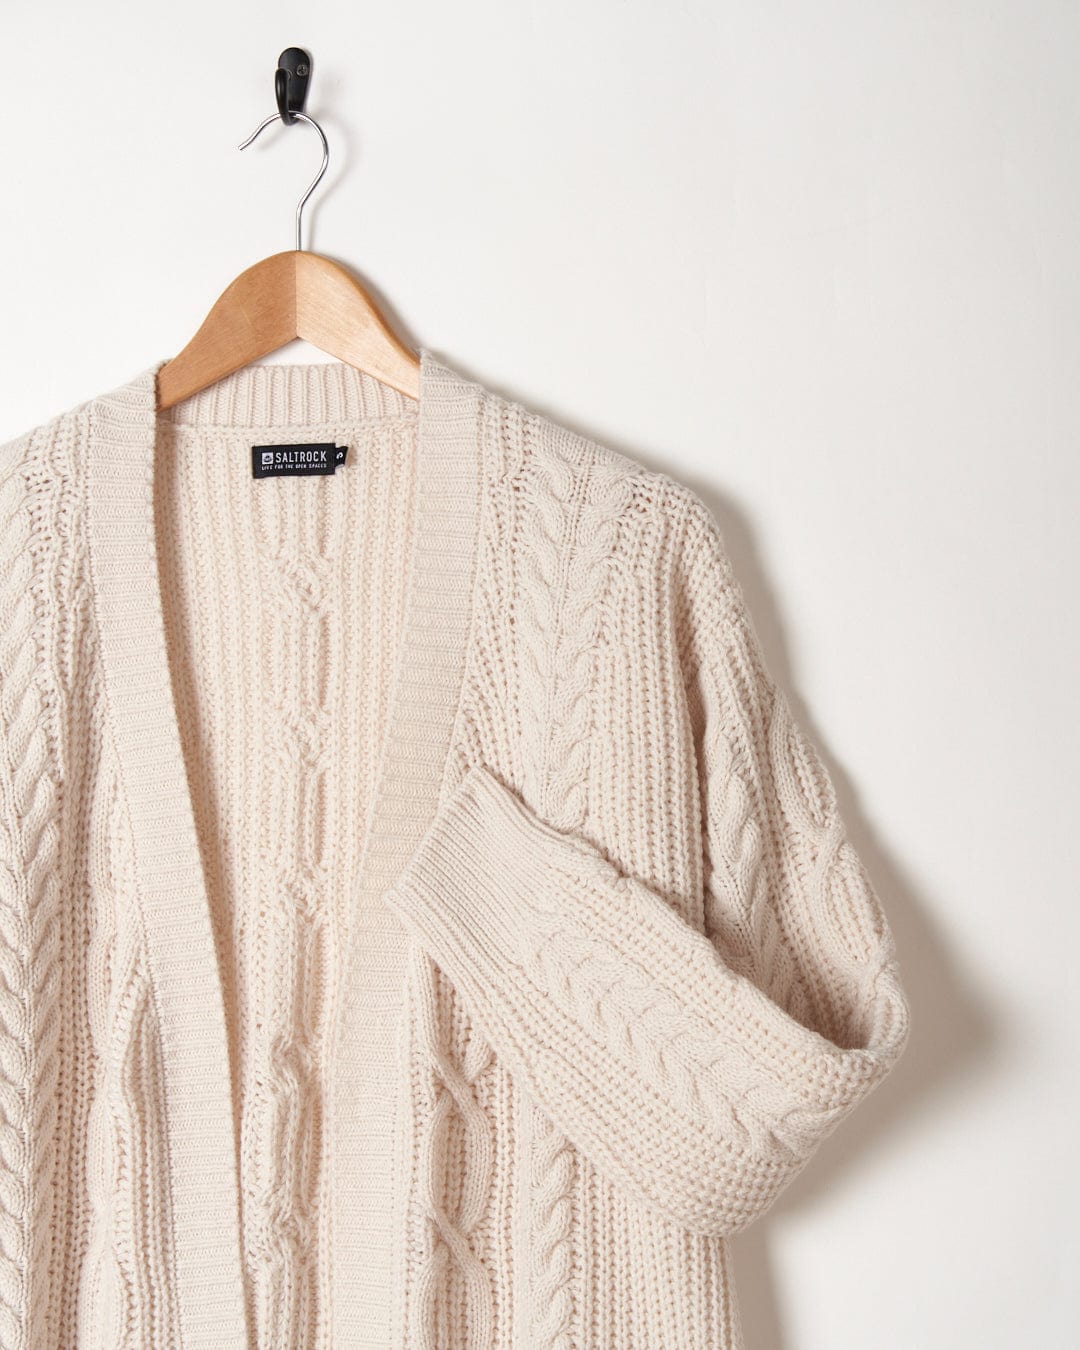 Saltrock Cream open-front cable-knit cardigan hanging on a coat hanger against a white background.